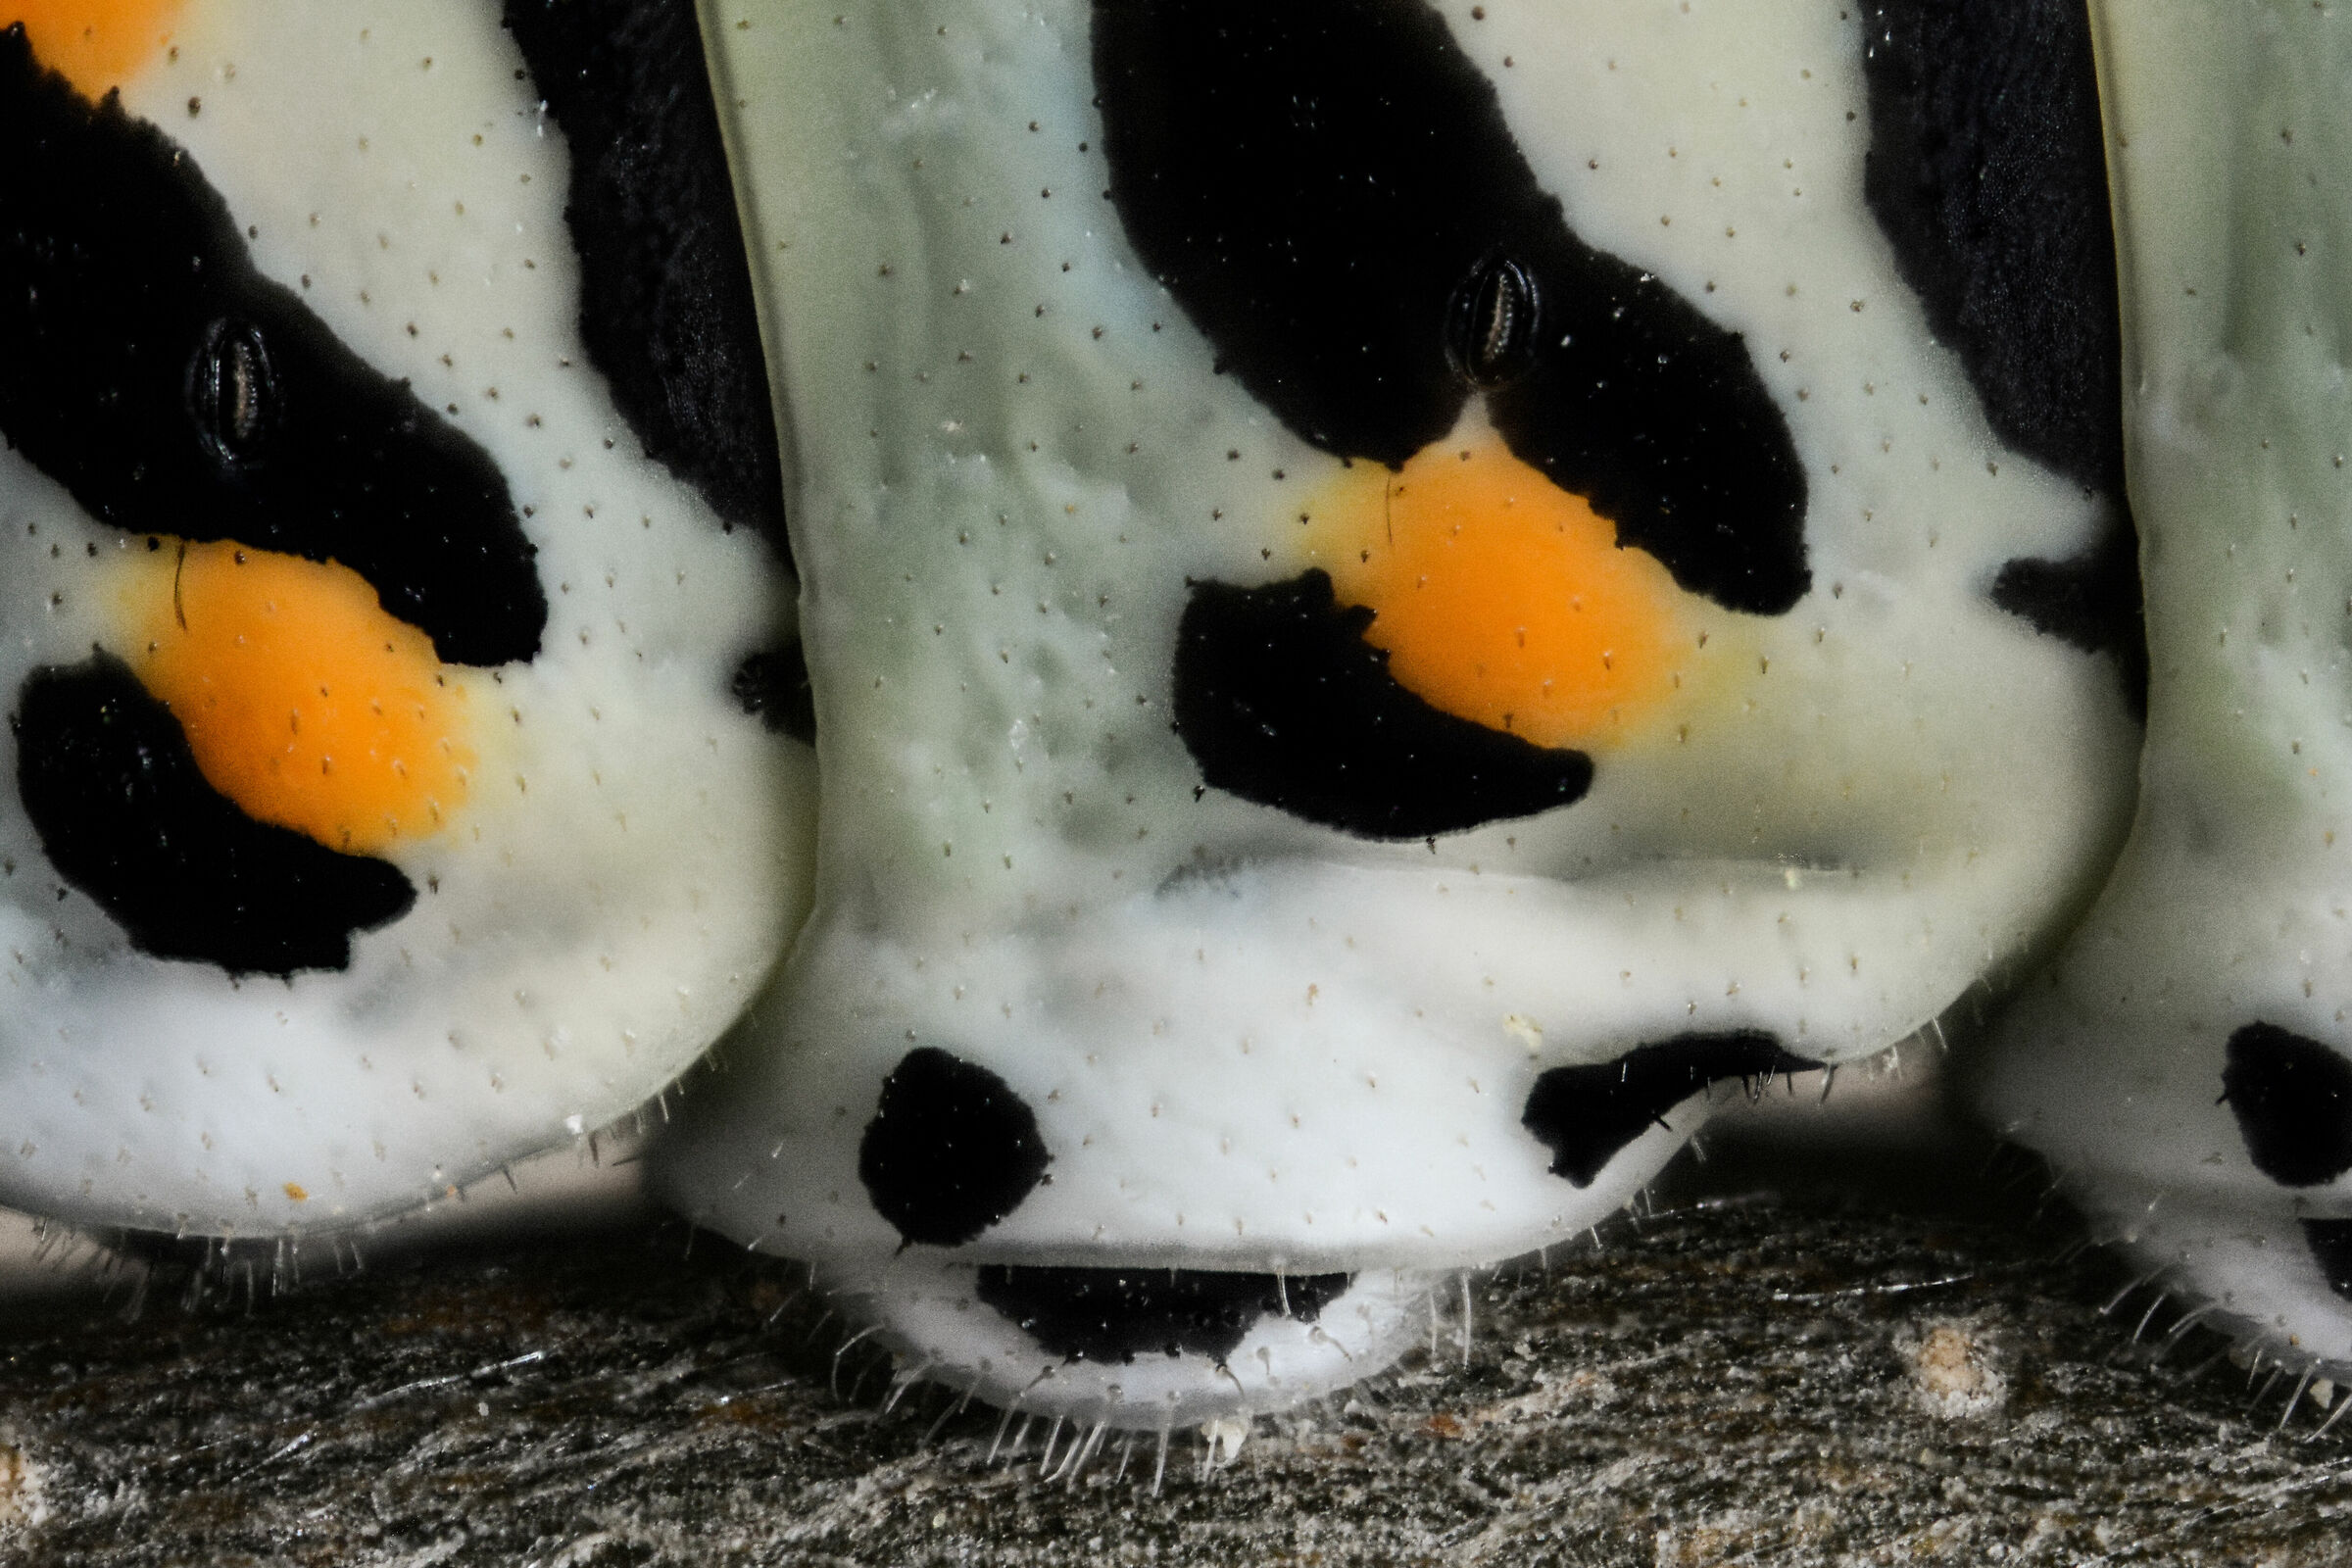 Macaone Caterpillar's Paws...